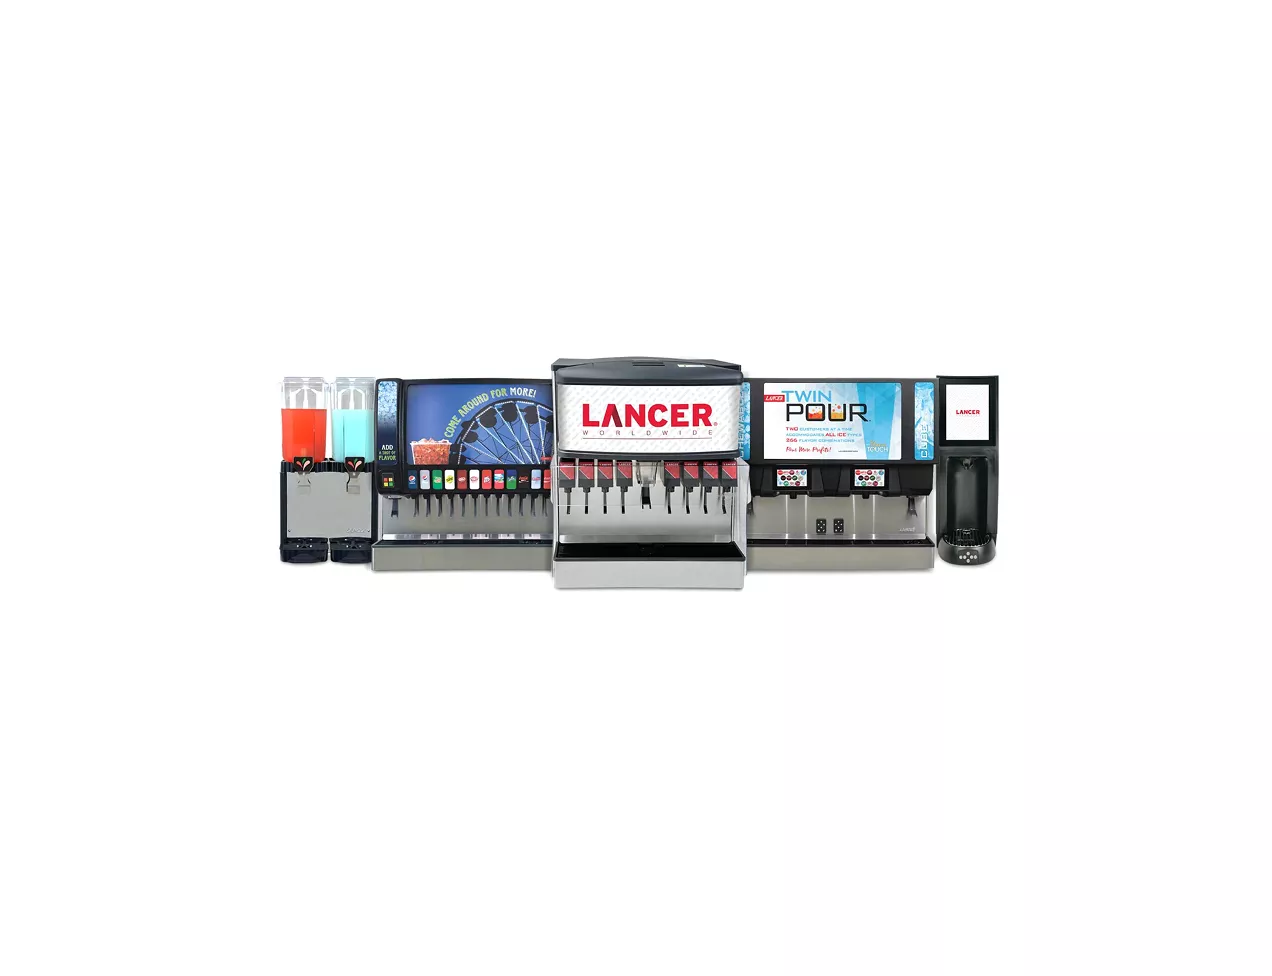 Lancer launches a small beverage dispenser in China